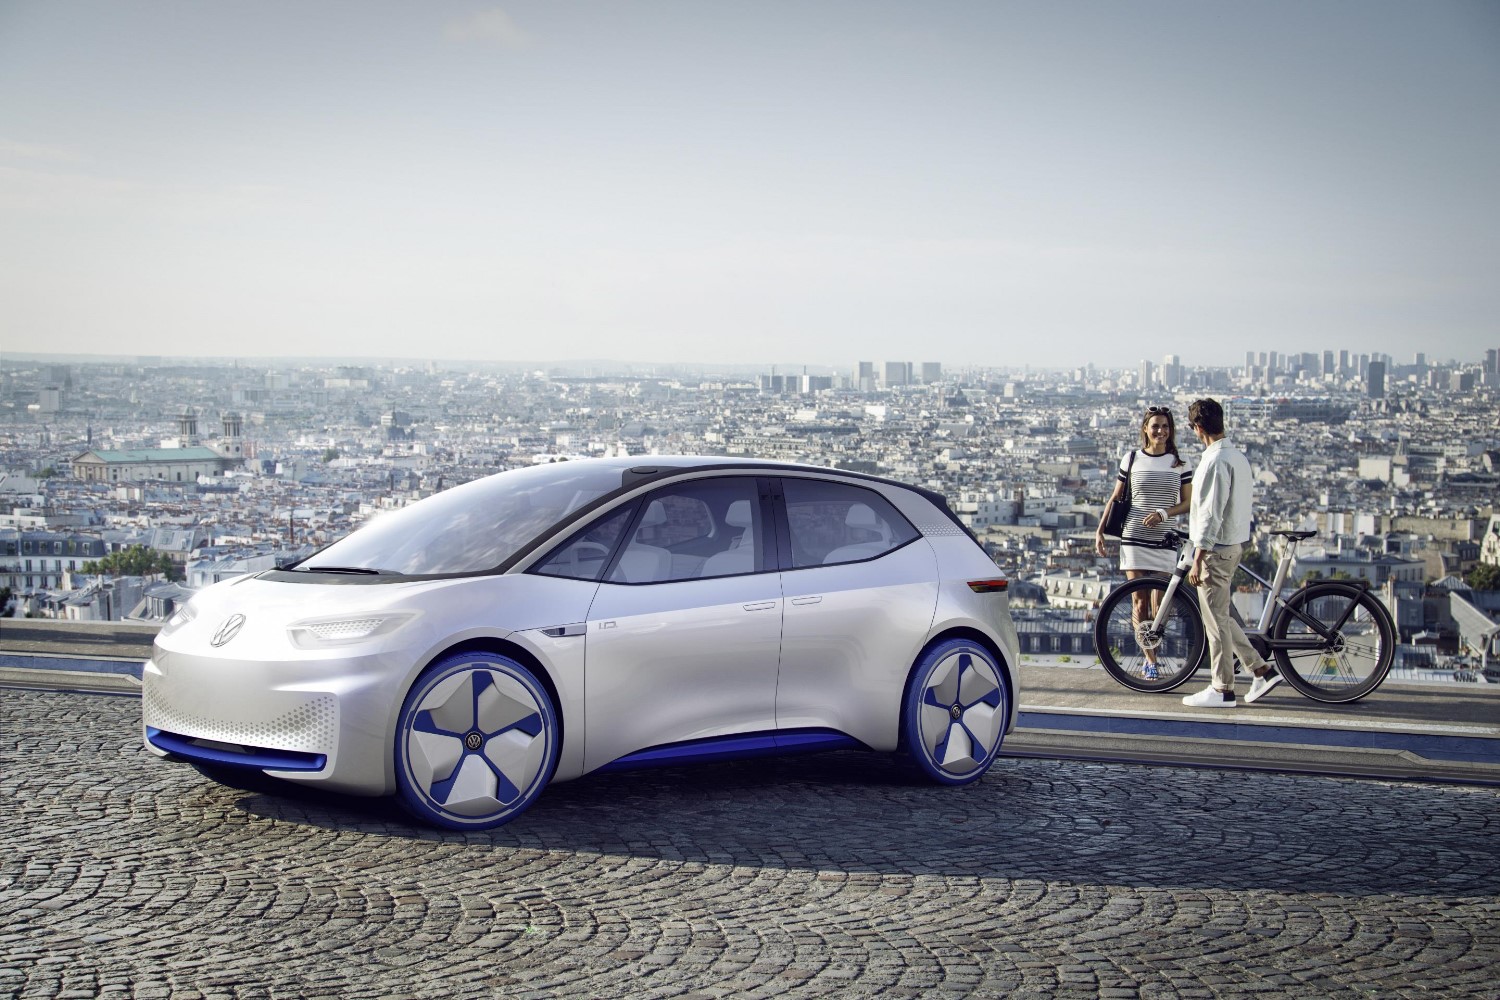 VW's I.D. concept car is all electric zero emissions